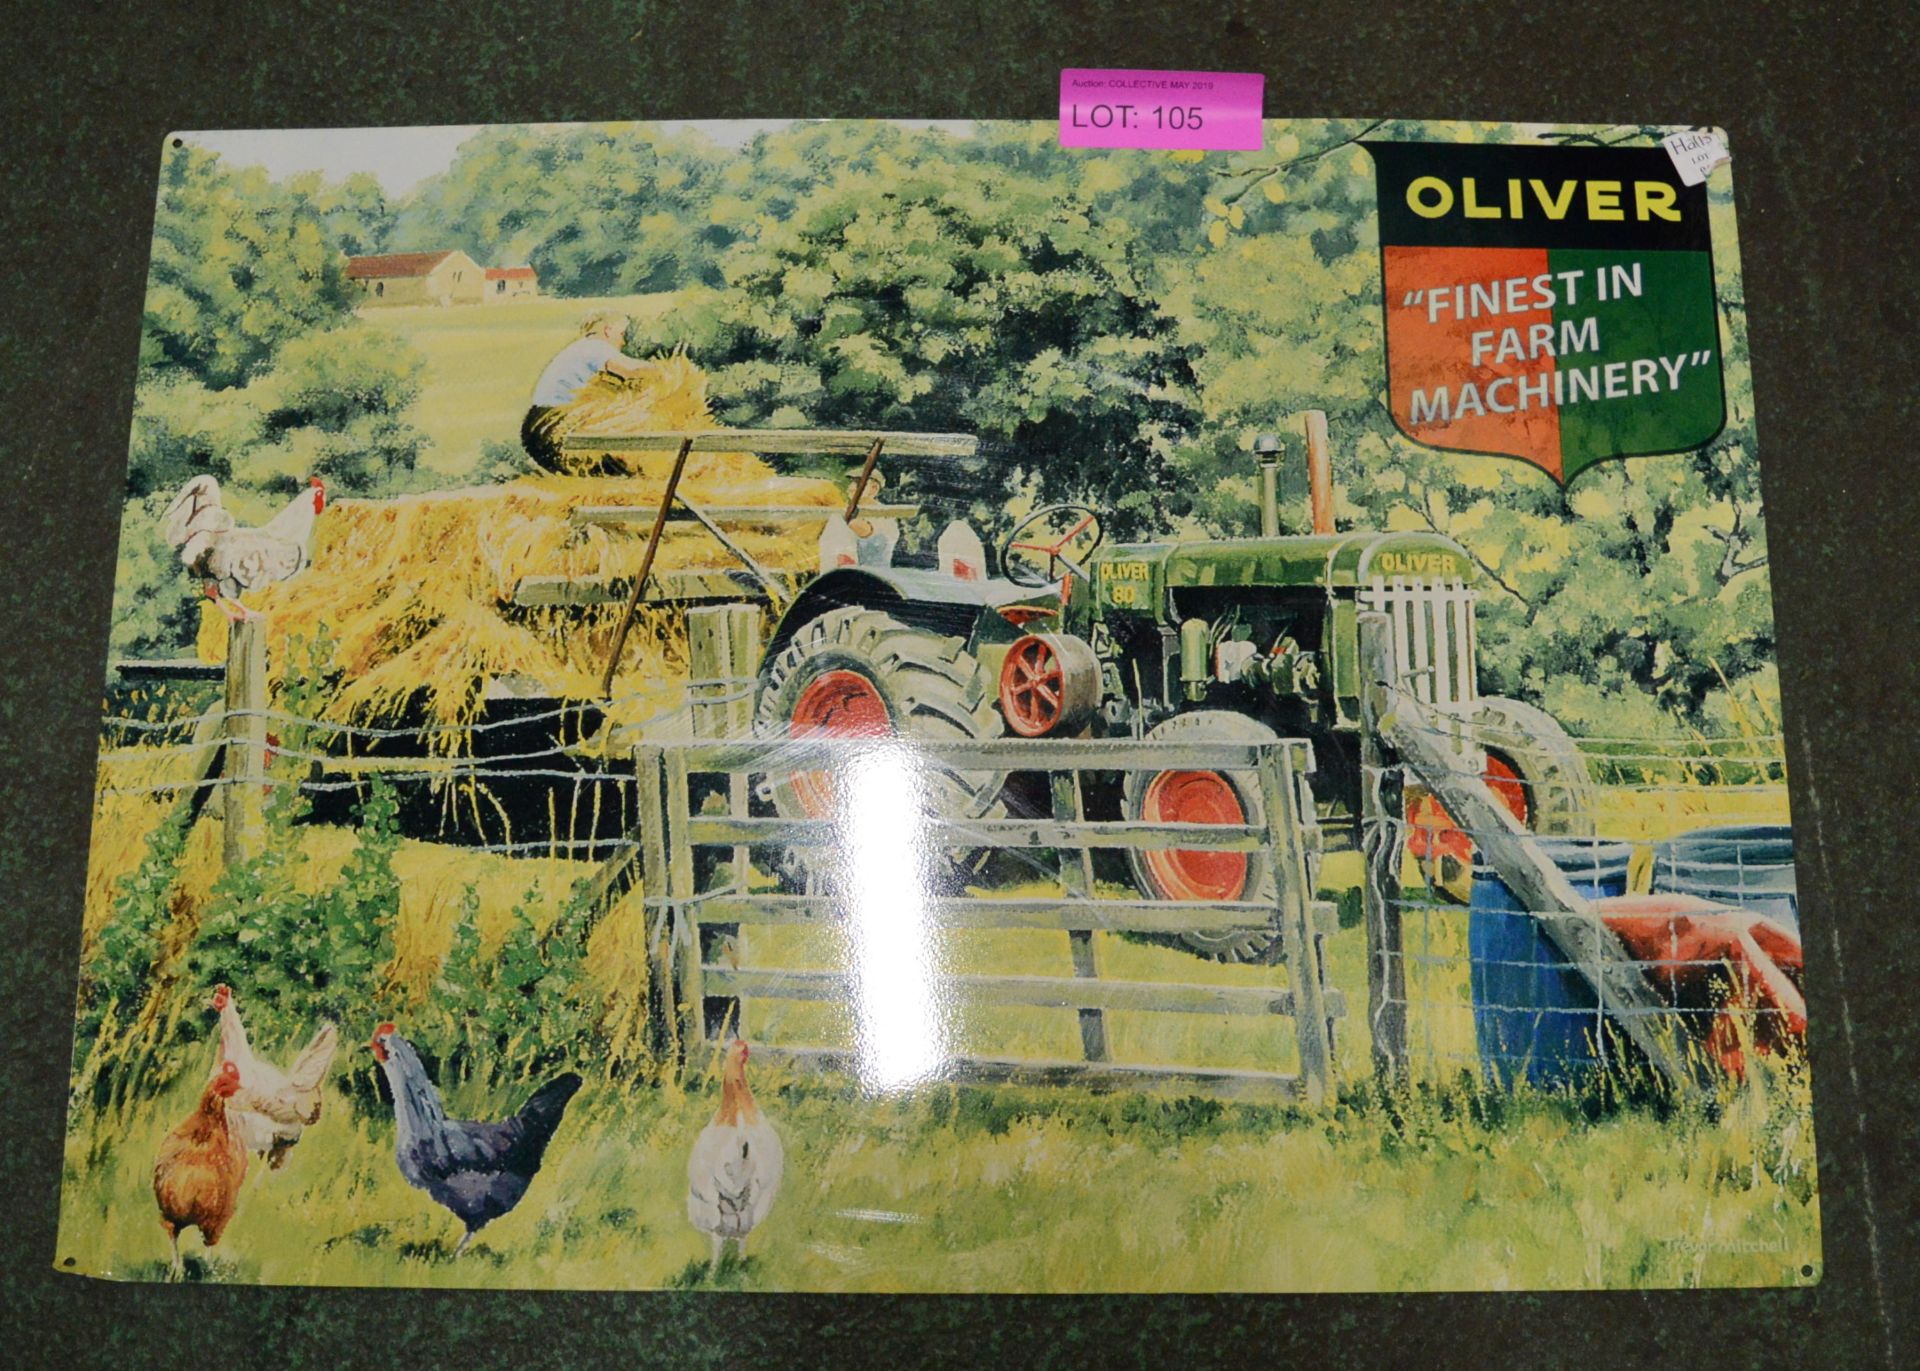 Oliver "Finest in Farm Machinery" Tin Sign - 700 x 500mm.